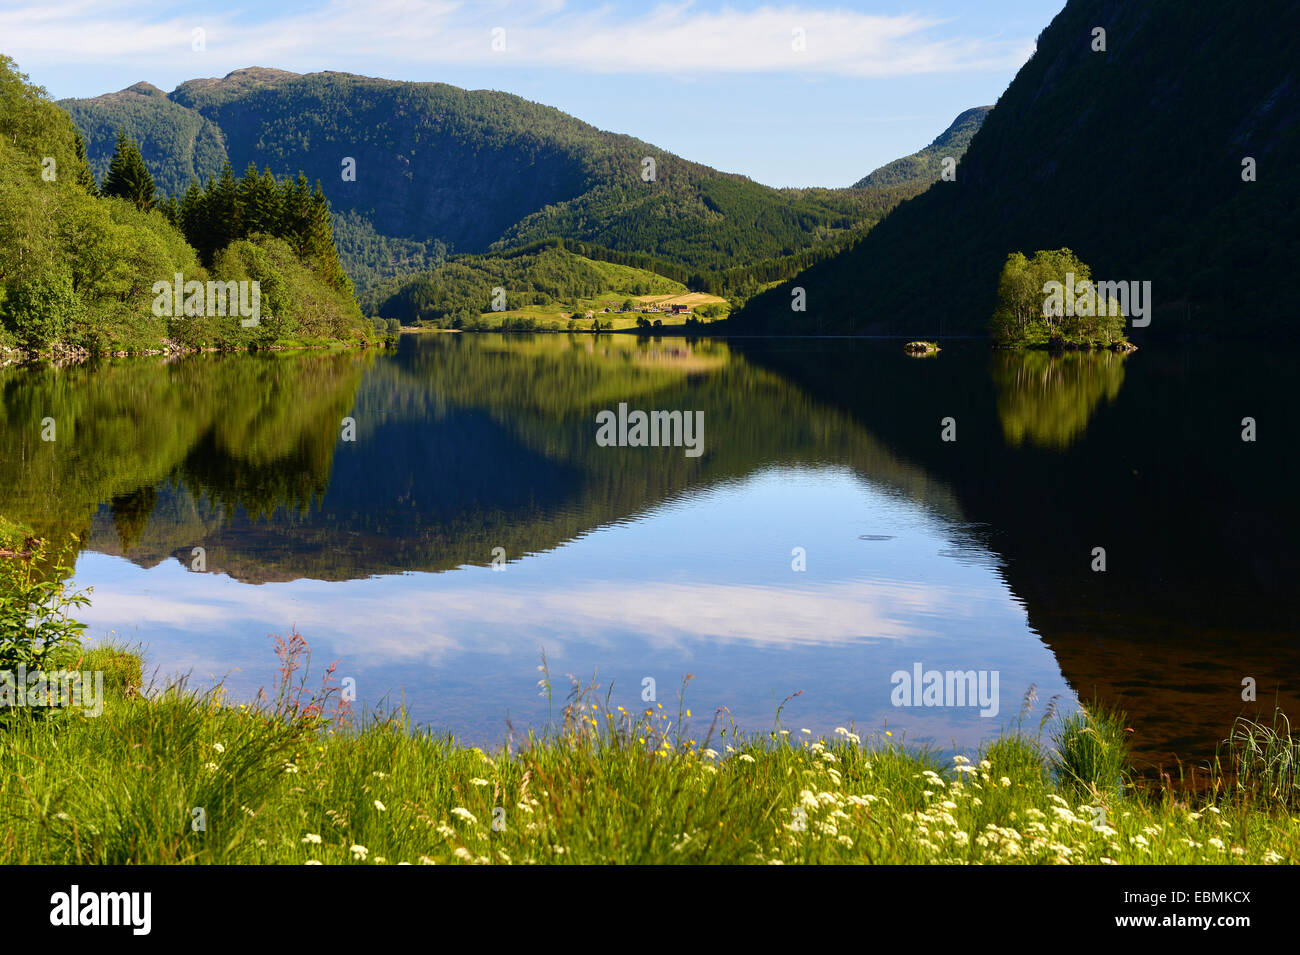 Lake with reflection and shadows in the county of Sogn og Fjordane, Norway Stock Photo